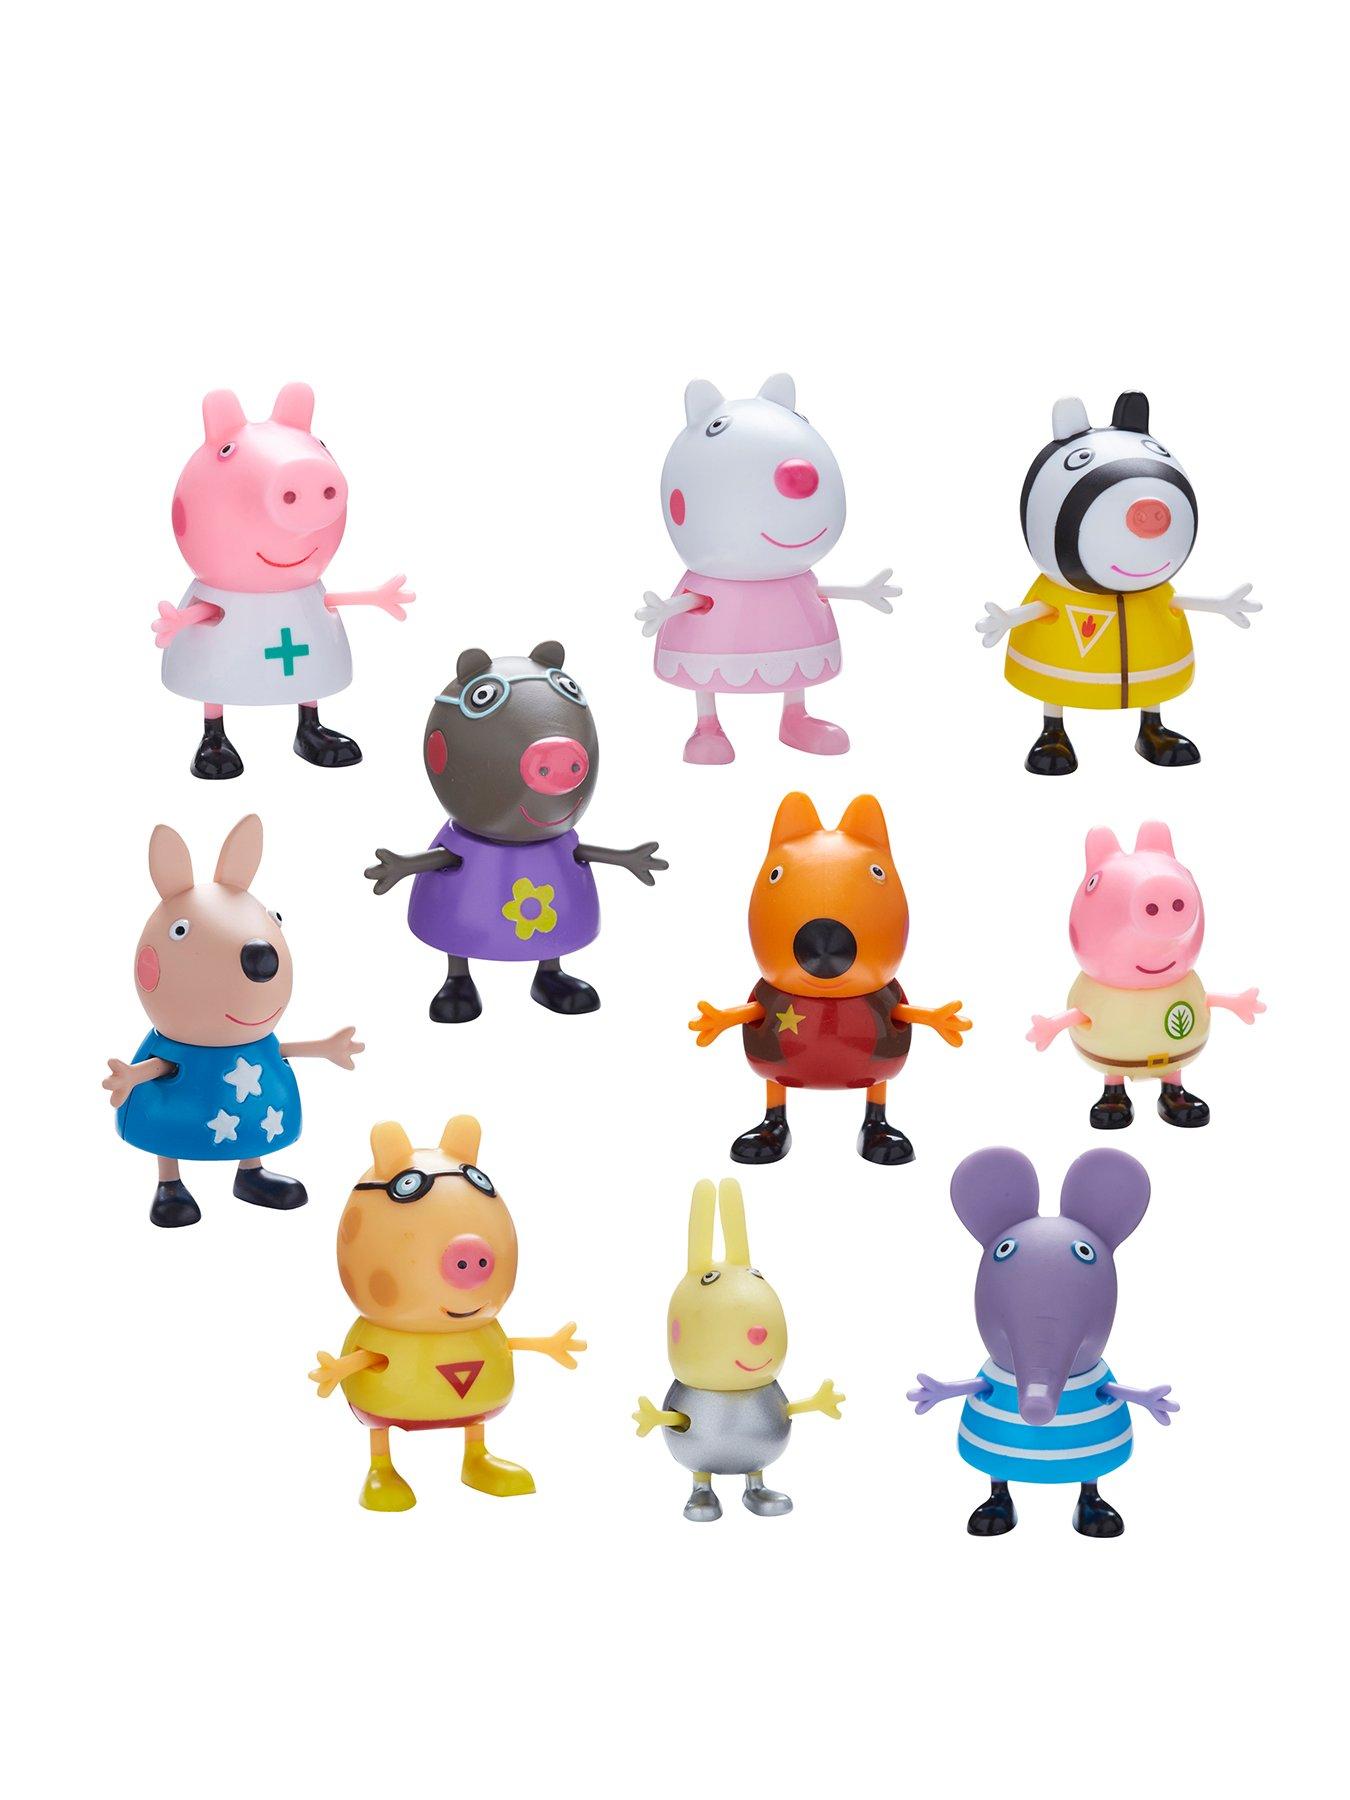 PEPPA PIG's Fancy Dress Sticker Box Pack of 200 Reusable Stickers